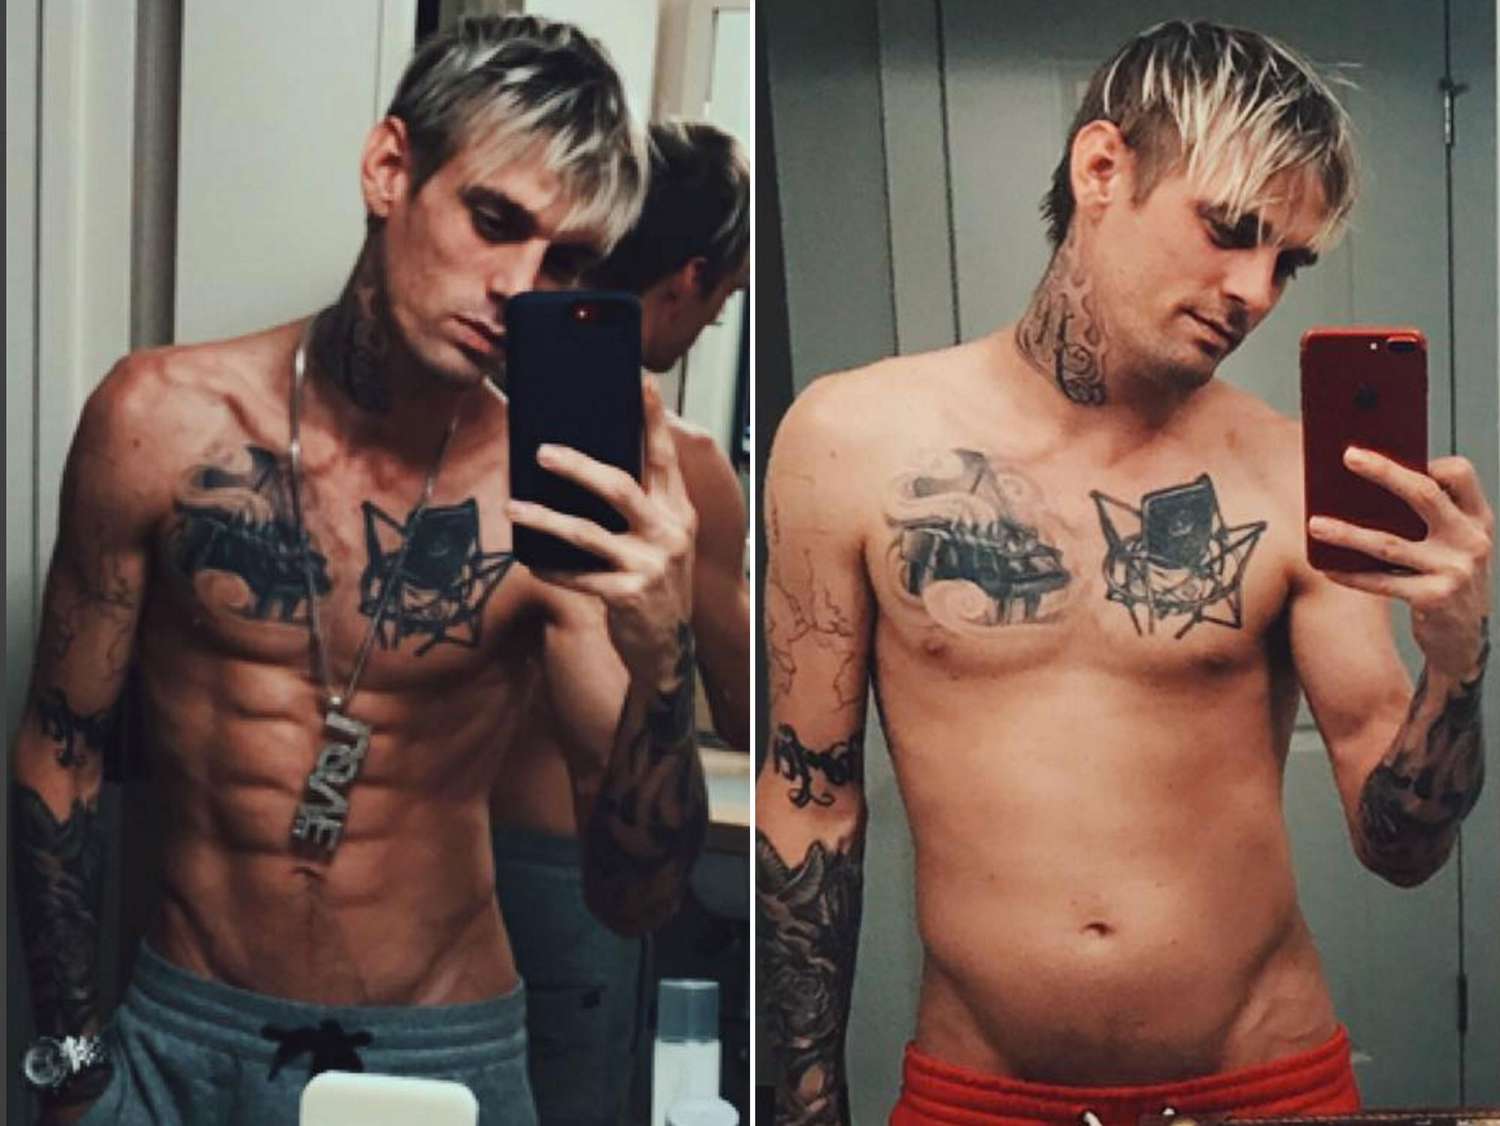 Aaron Carter Only Fans chat messenger